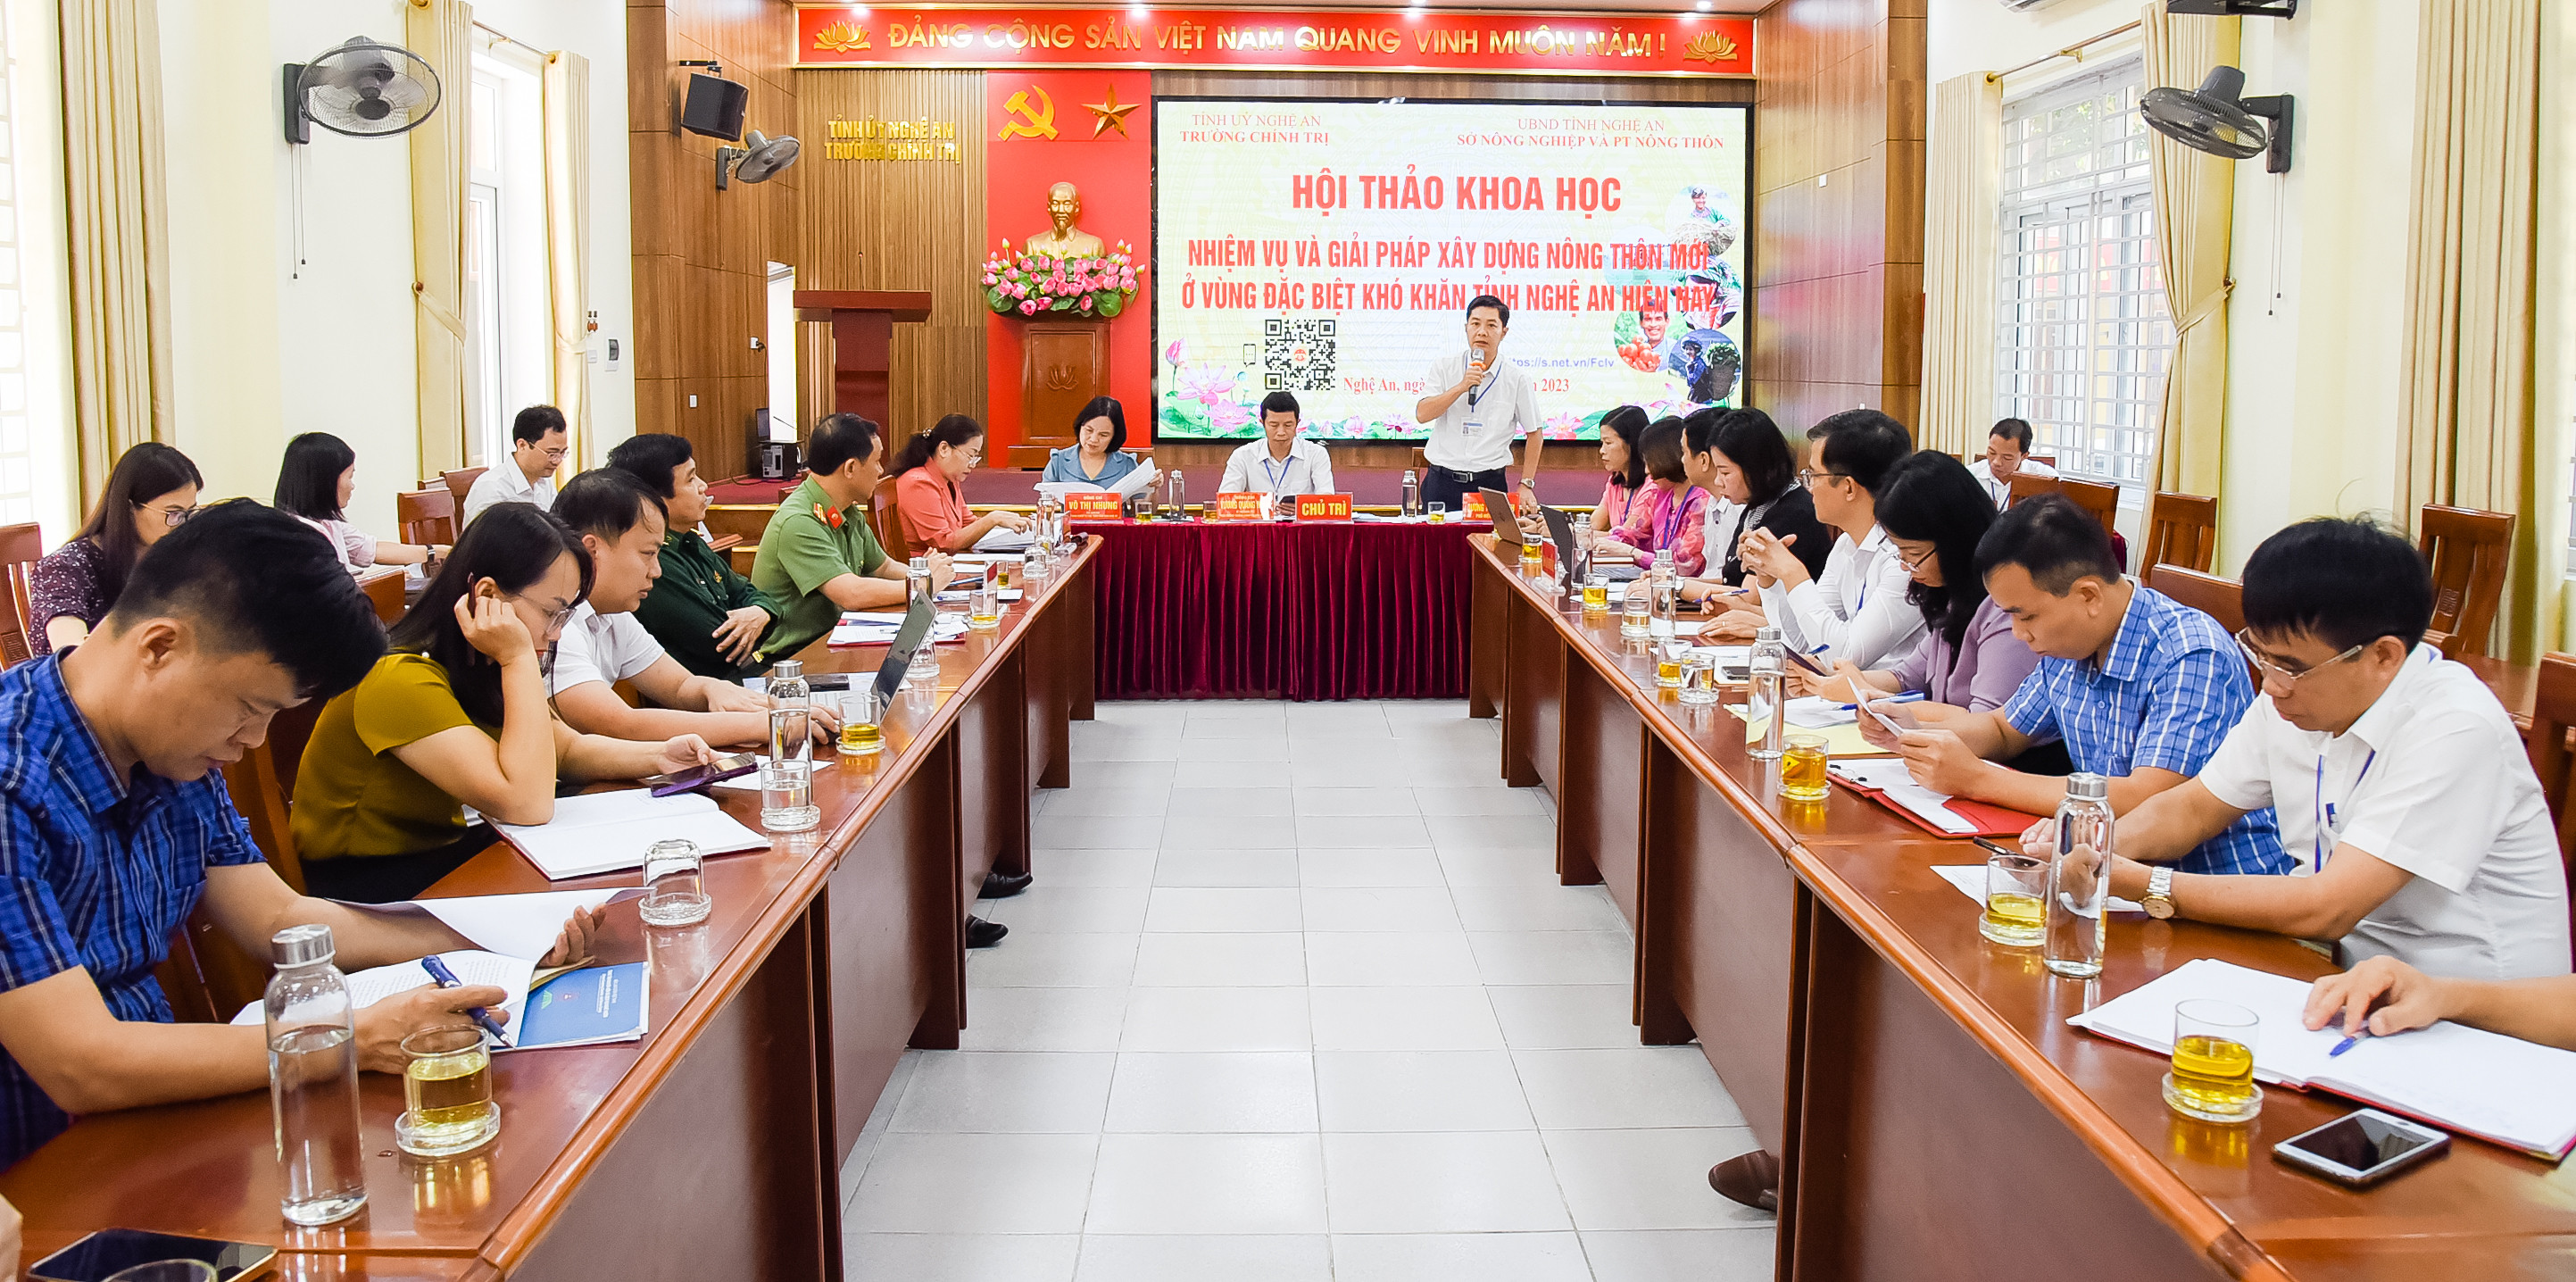 bna_ quang canh ht. anh thanh le.jpg